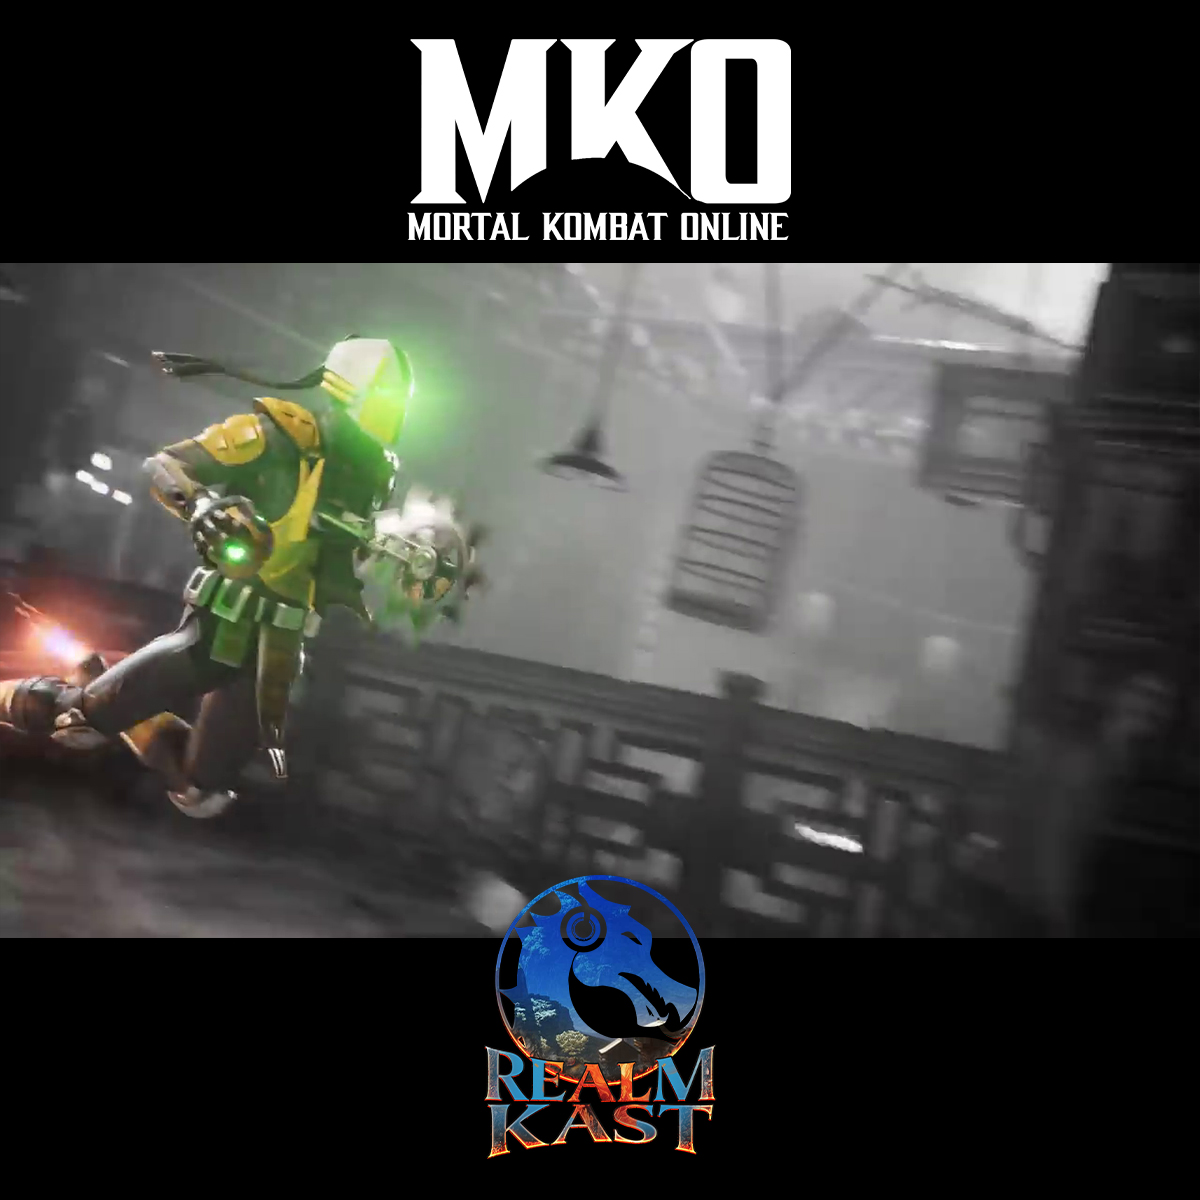 The Realm Kast: Mortal Kombat Online on X: Here are some more shots of the  Lin Kuei from the newest Mortal Kombat 1 trailer.   #MK1 #MortalKombat #MortalKombat1  / X